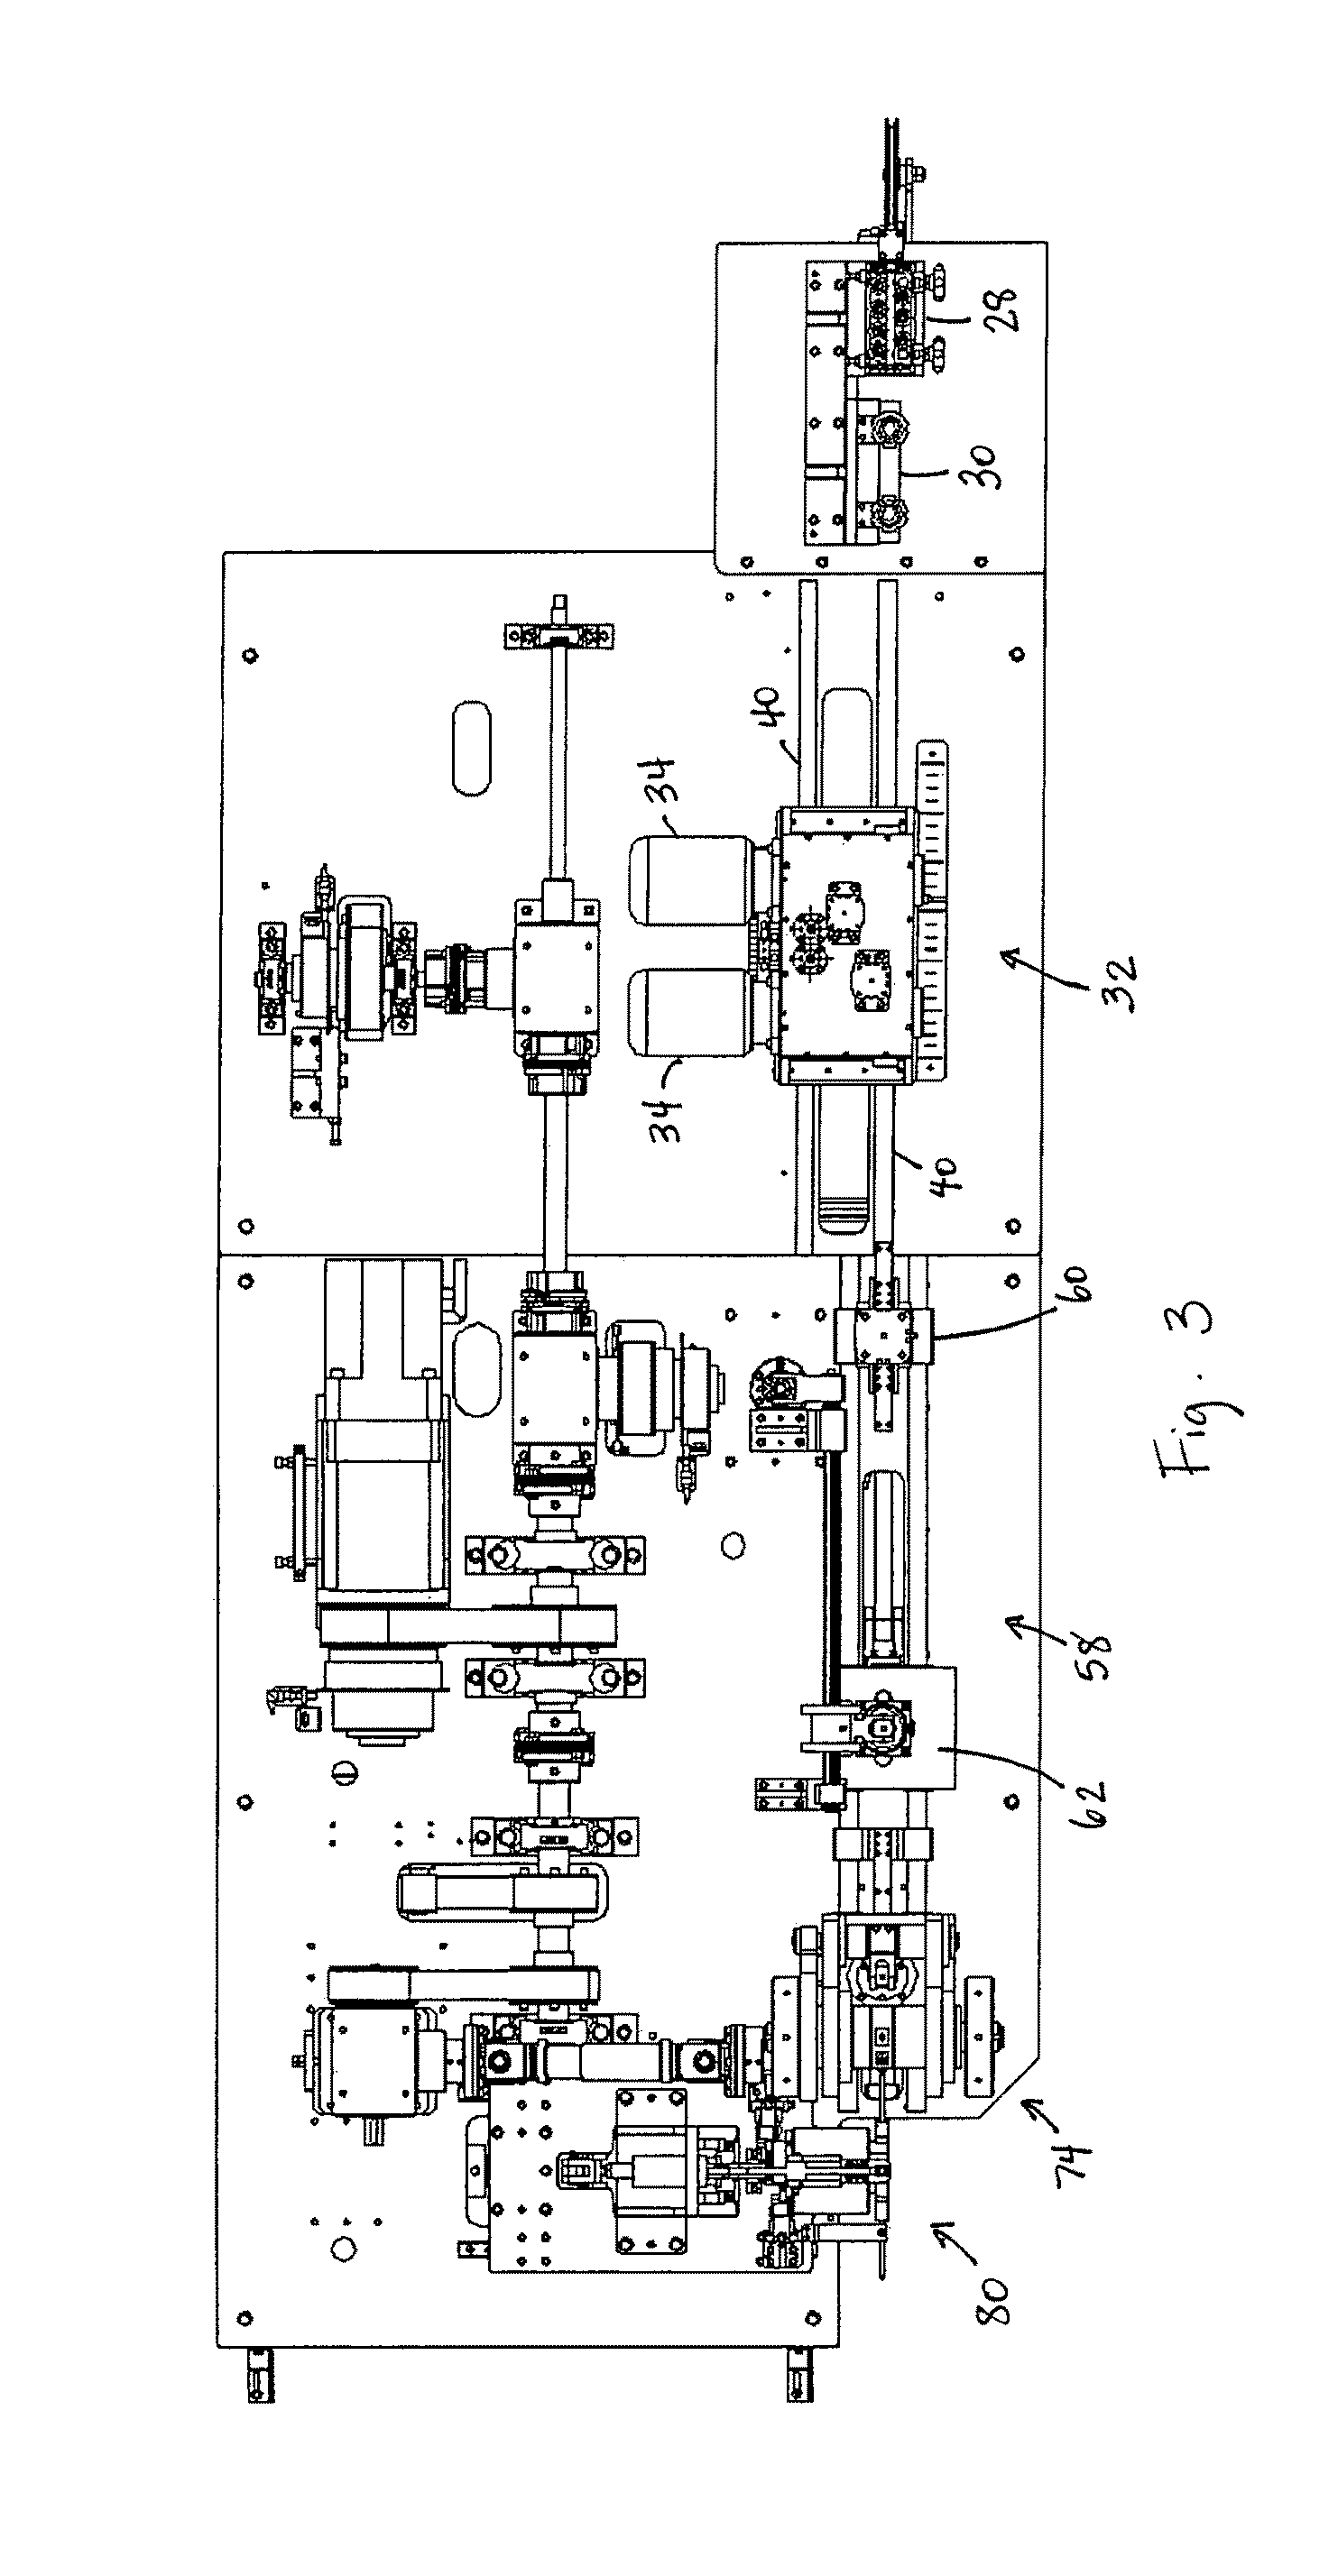 Method for pre-forming conductors for motor rotors and stators